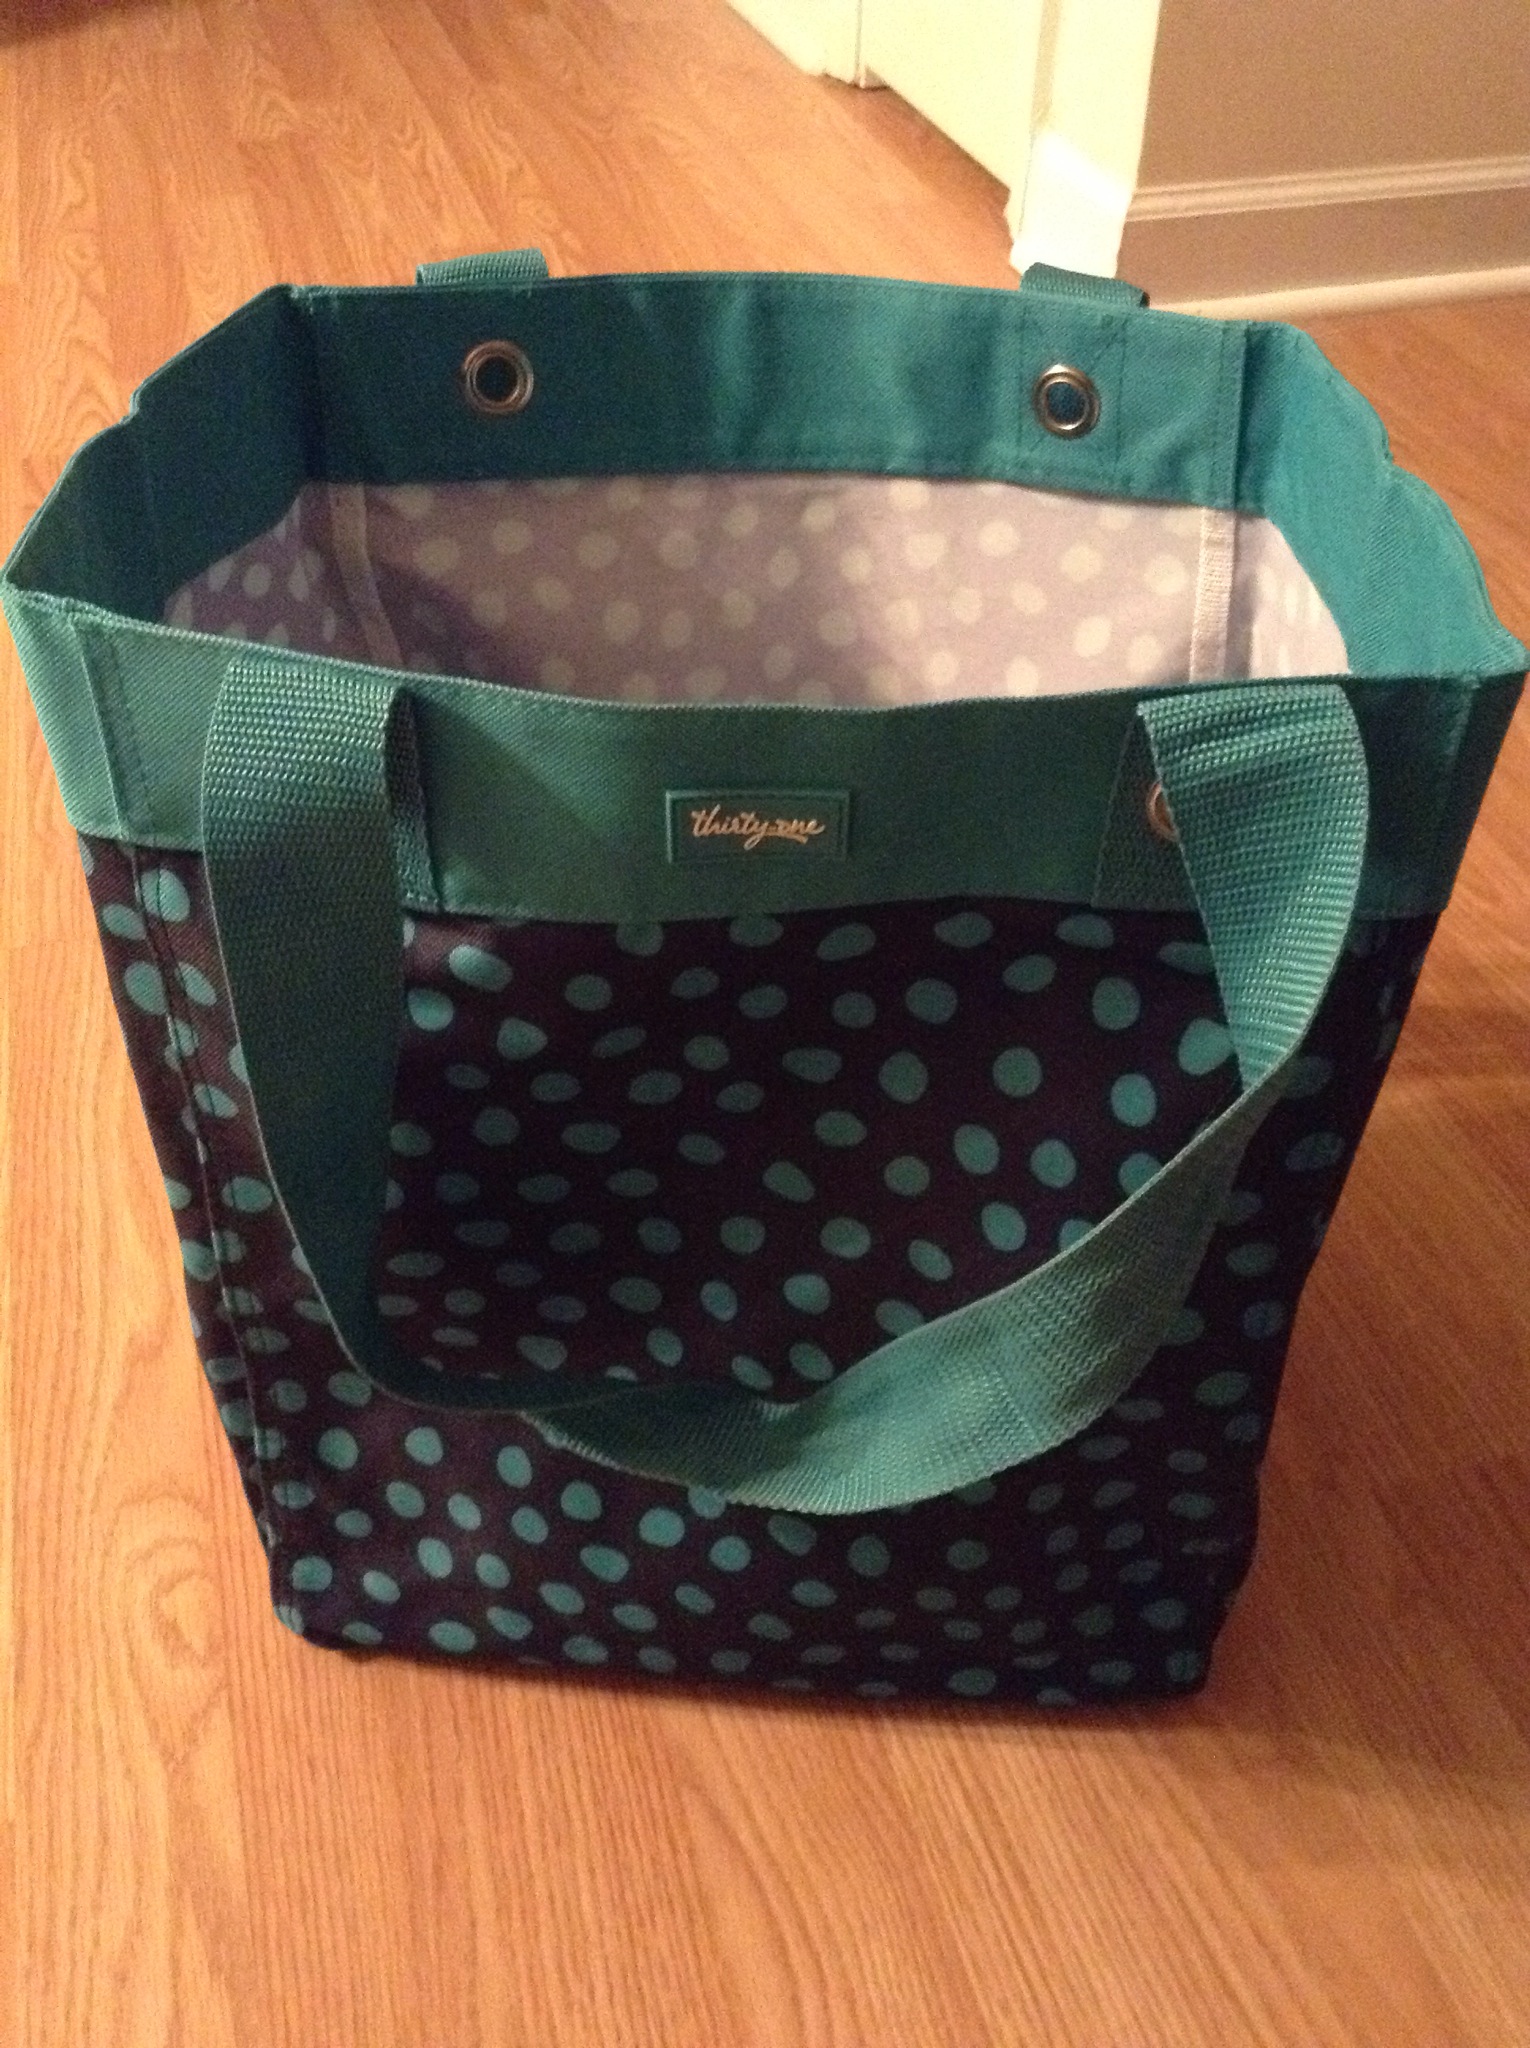 New fall 2014 thirty one gifts consultant enrollment kit!